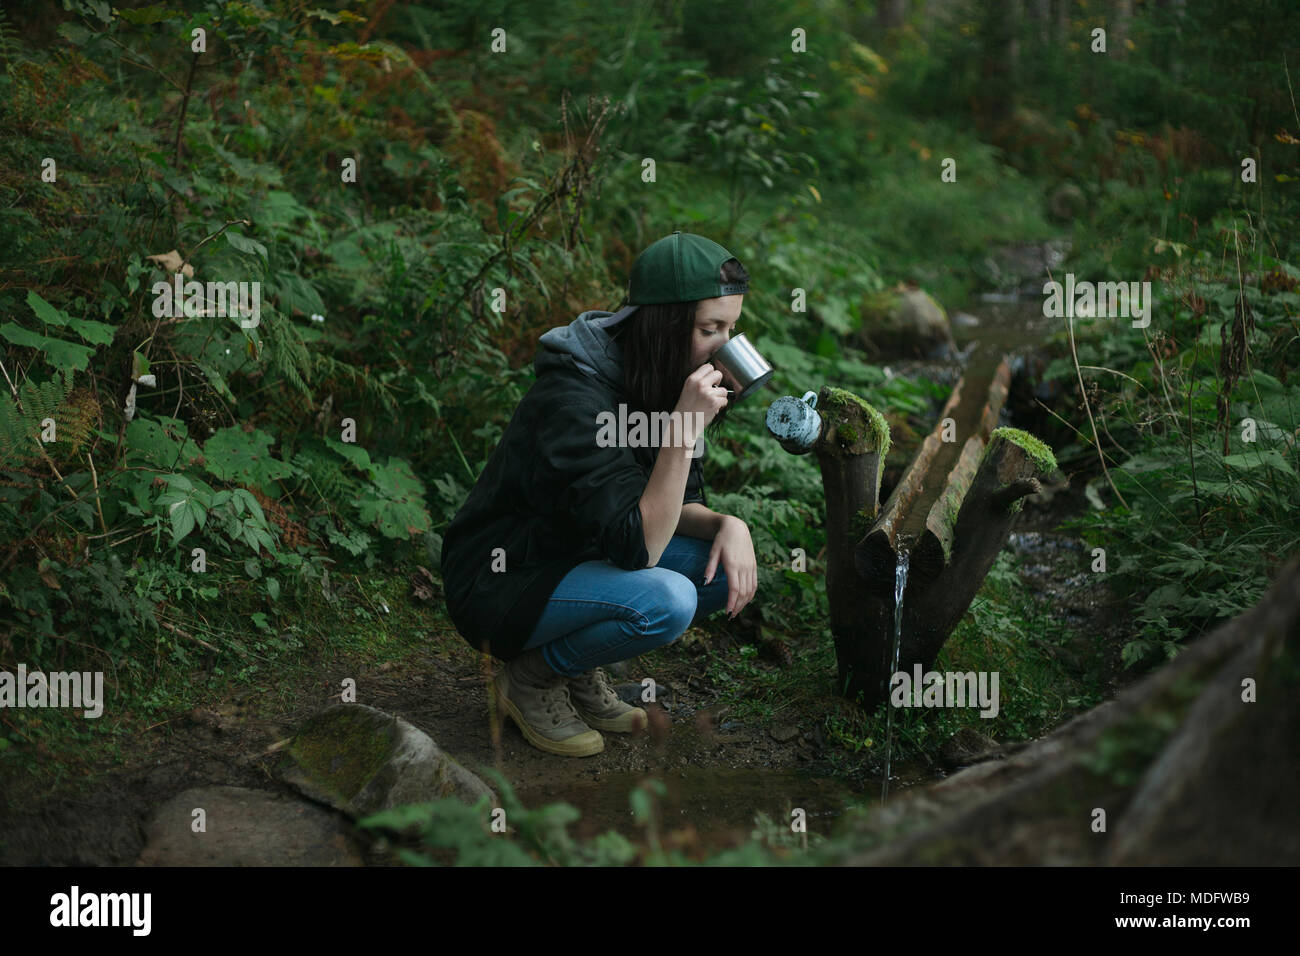 Woman crouching by a stream drinking water Stock Photo